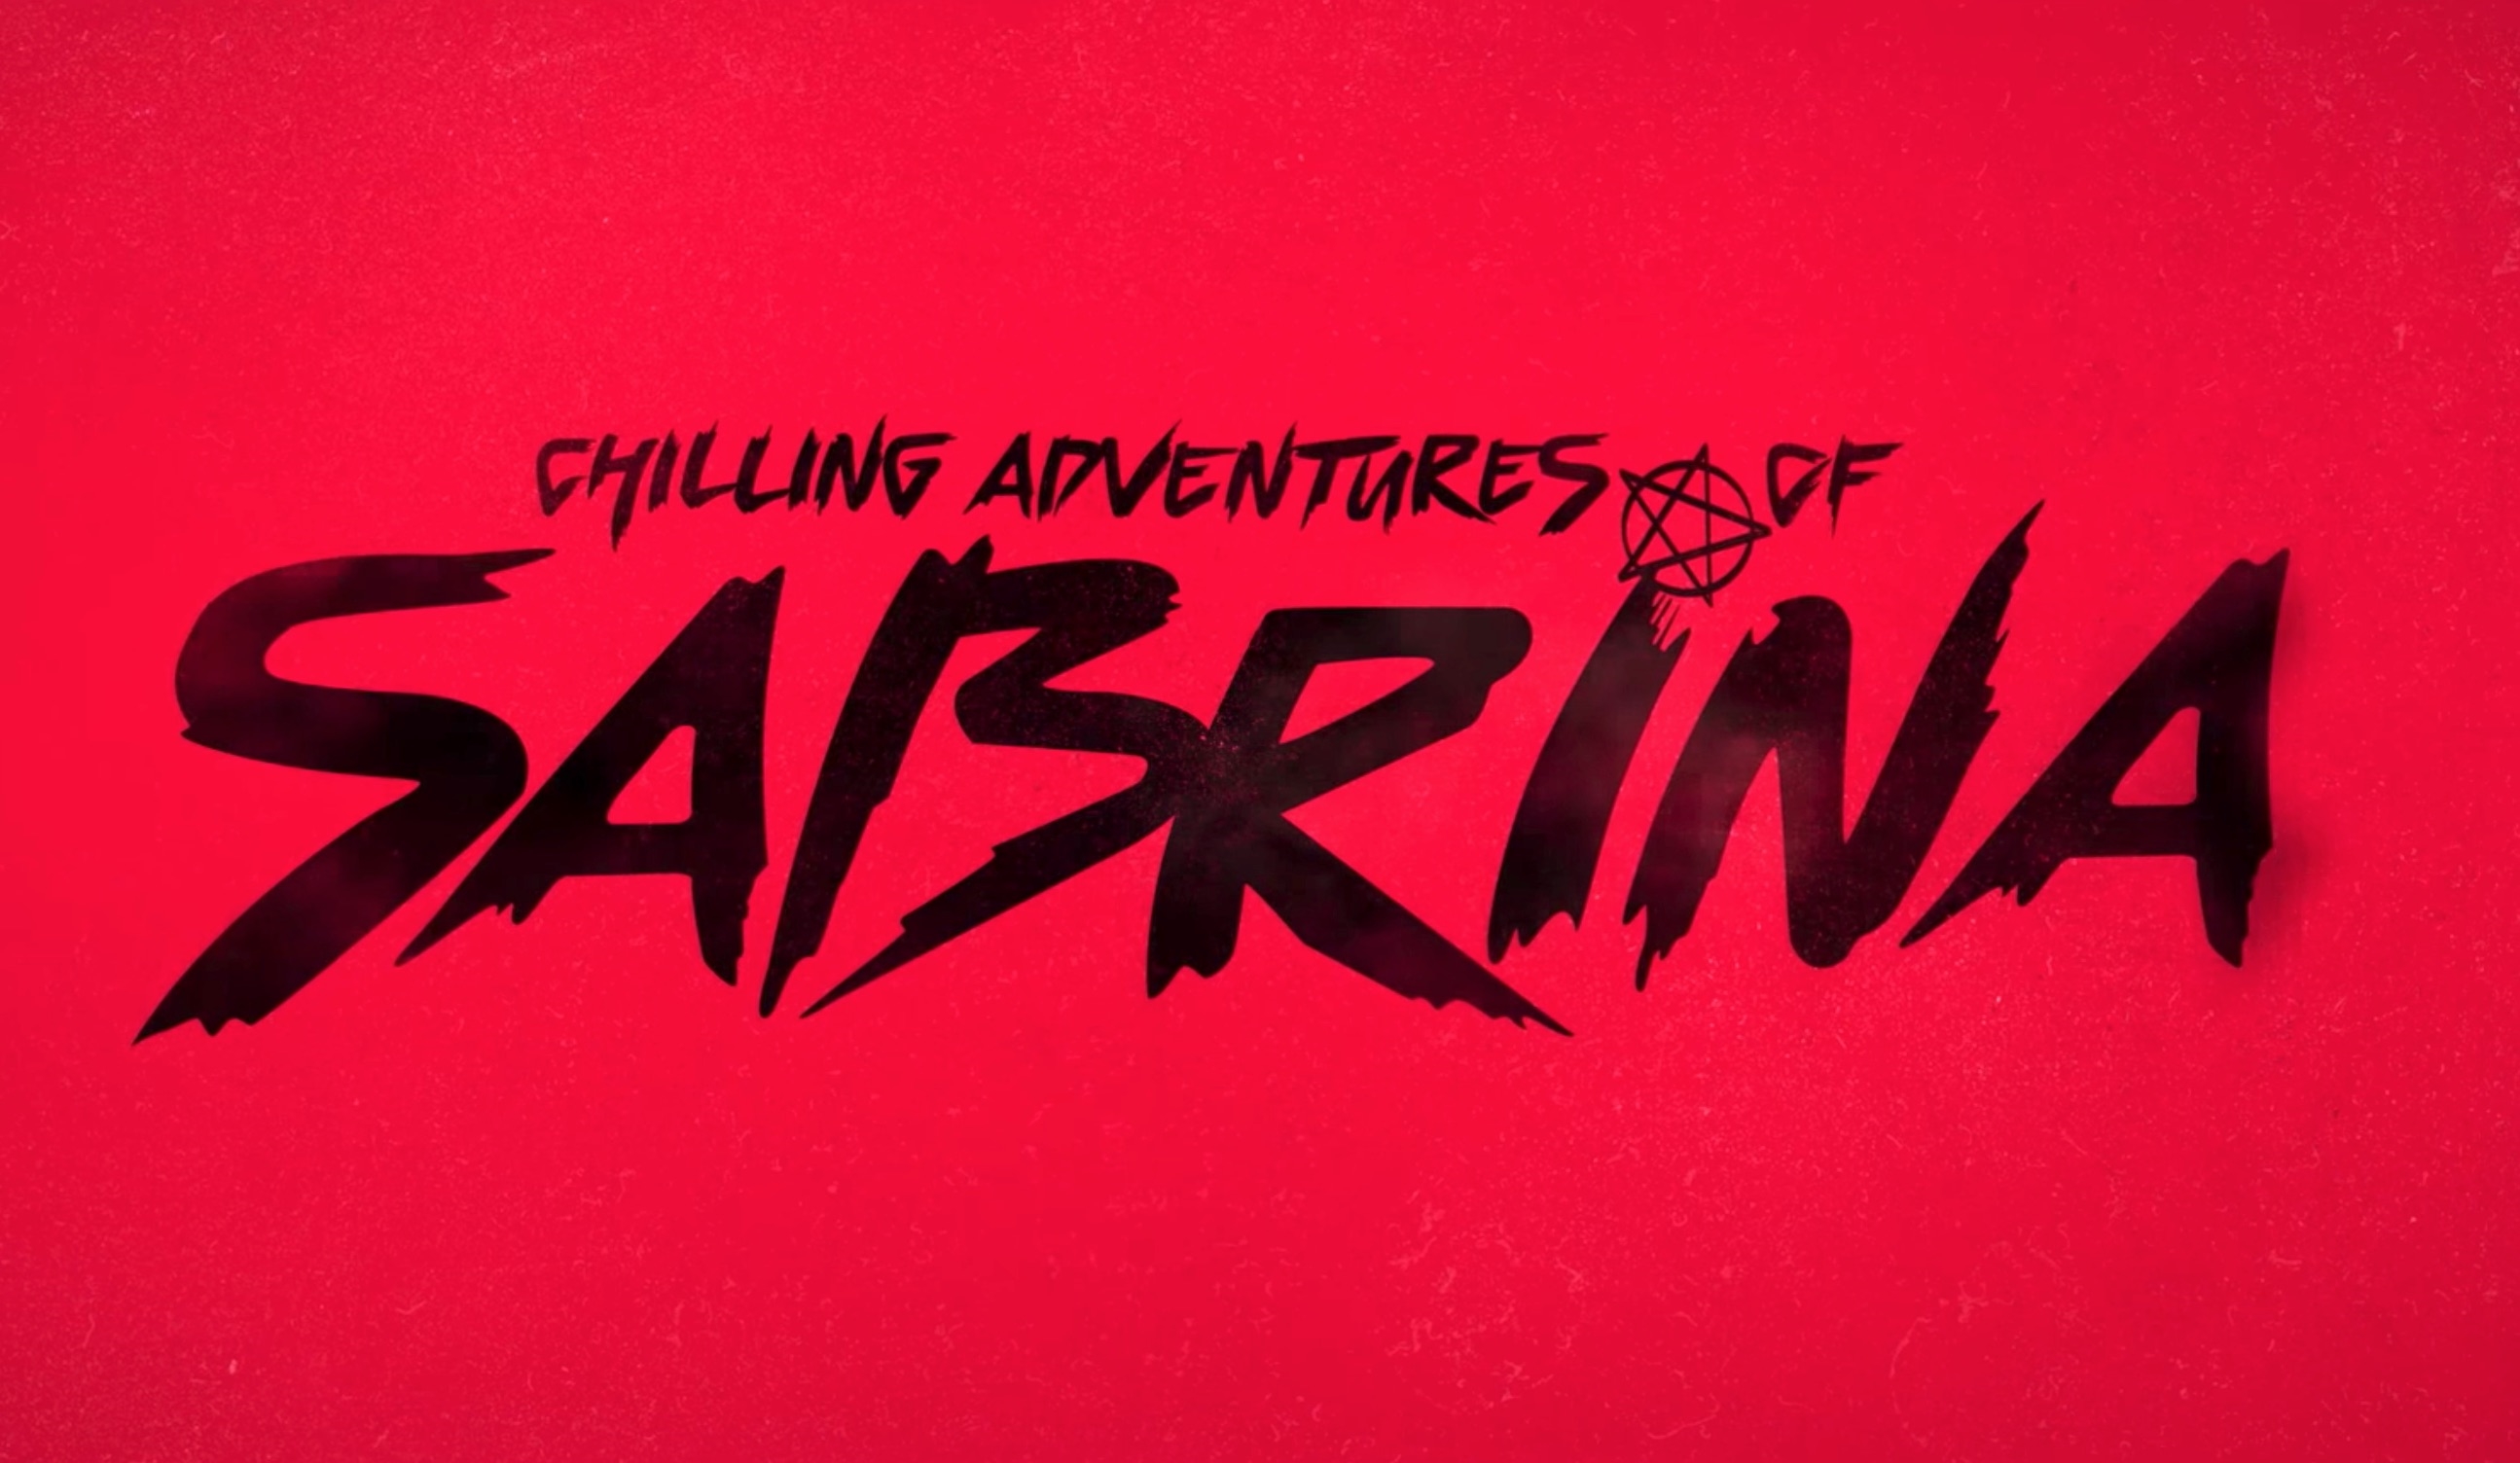 Netflix's 'Chilling Adventures of Sabrina' trades kitsch for pentagrams | DeviceDaily.com